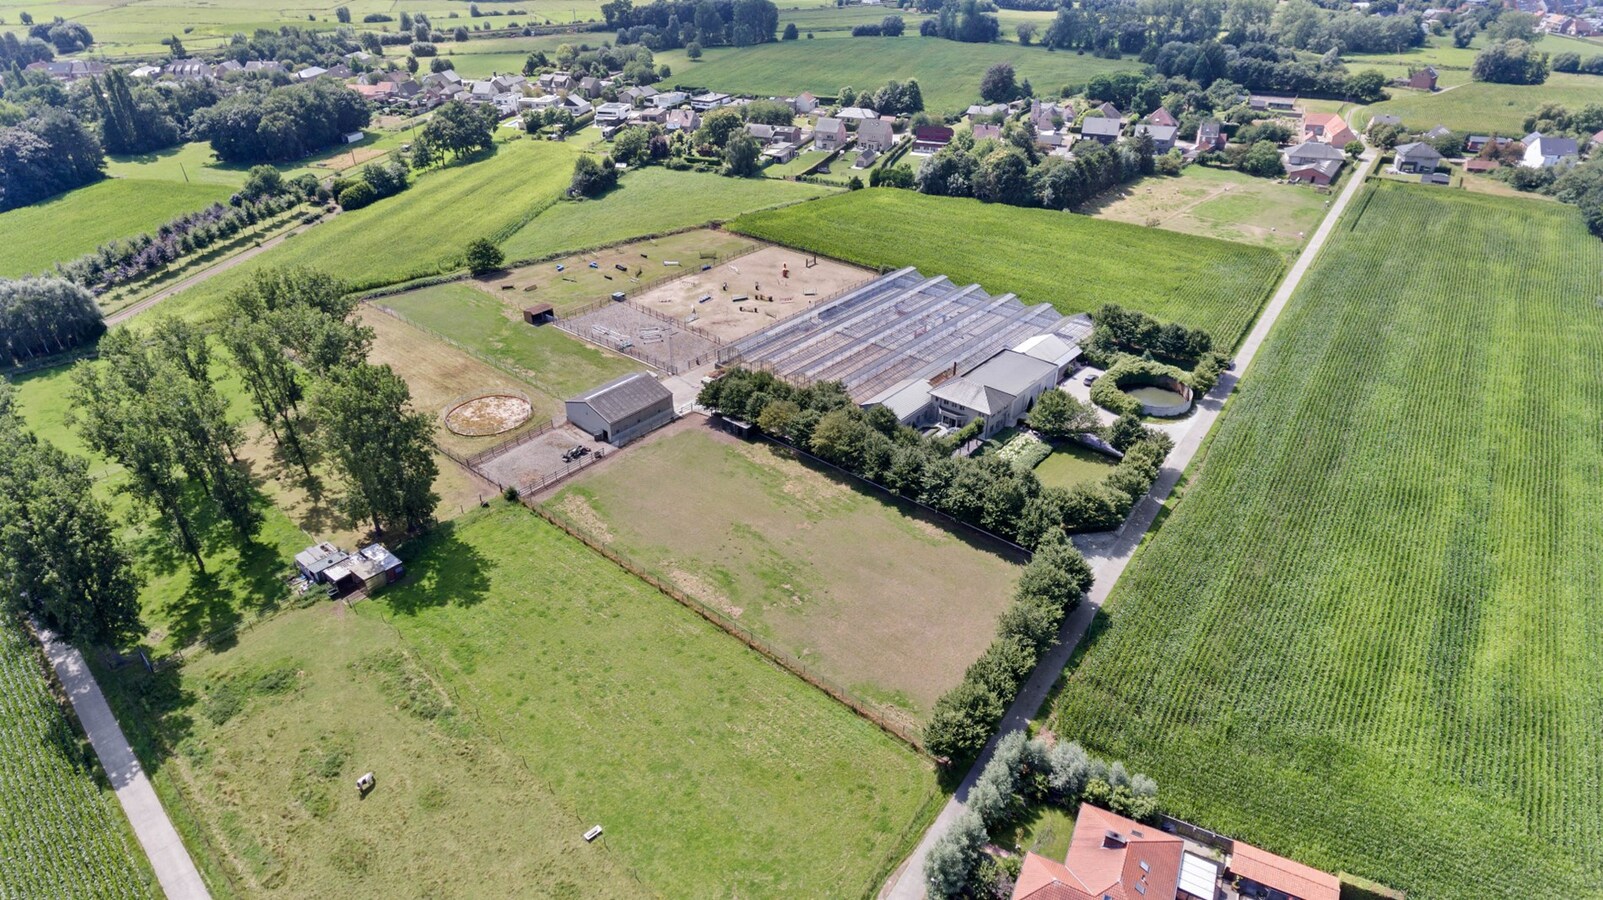 Property for sale |  with option - with restrictions in Buggenhout